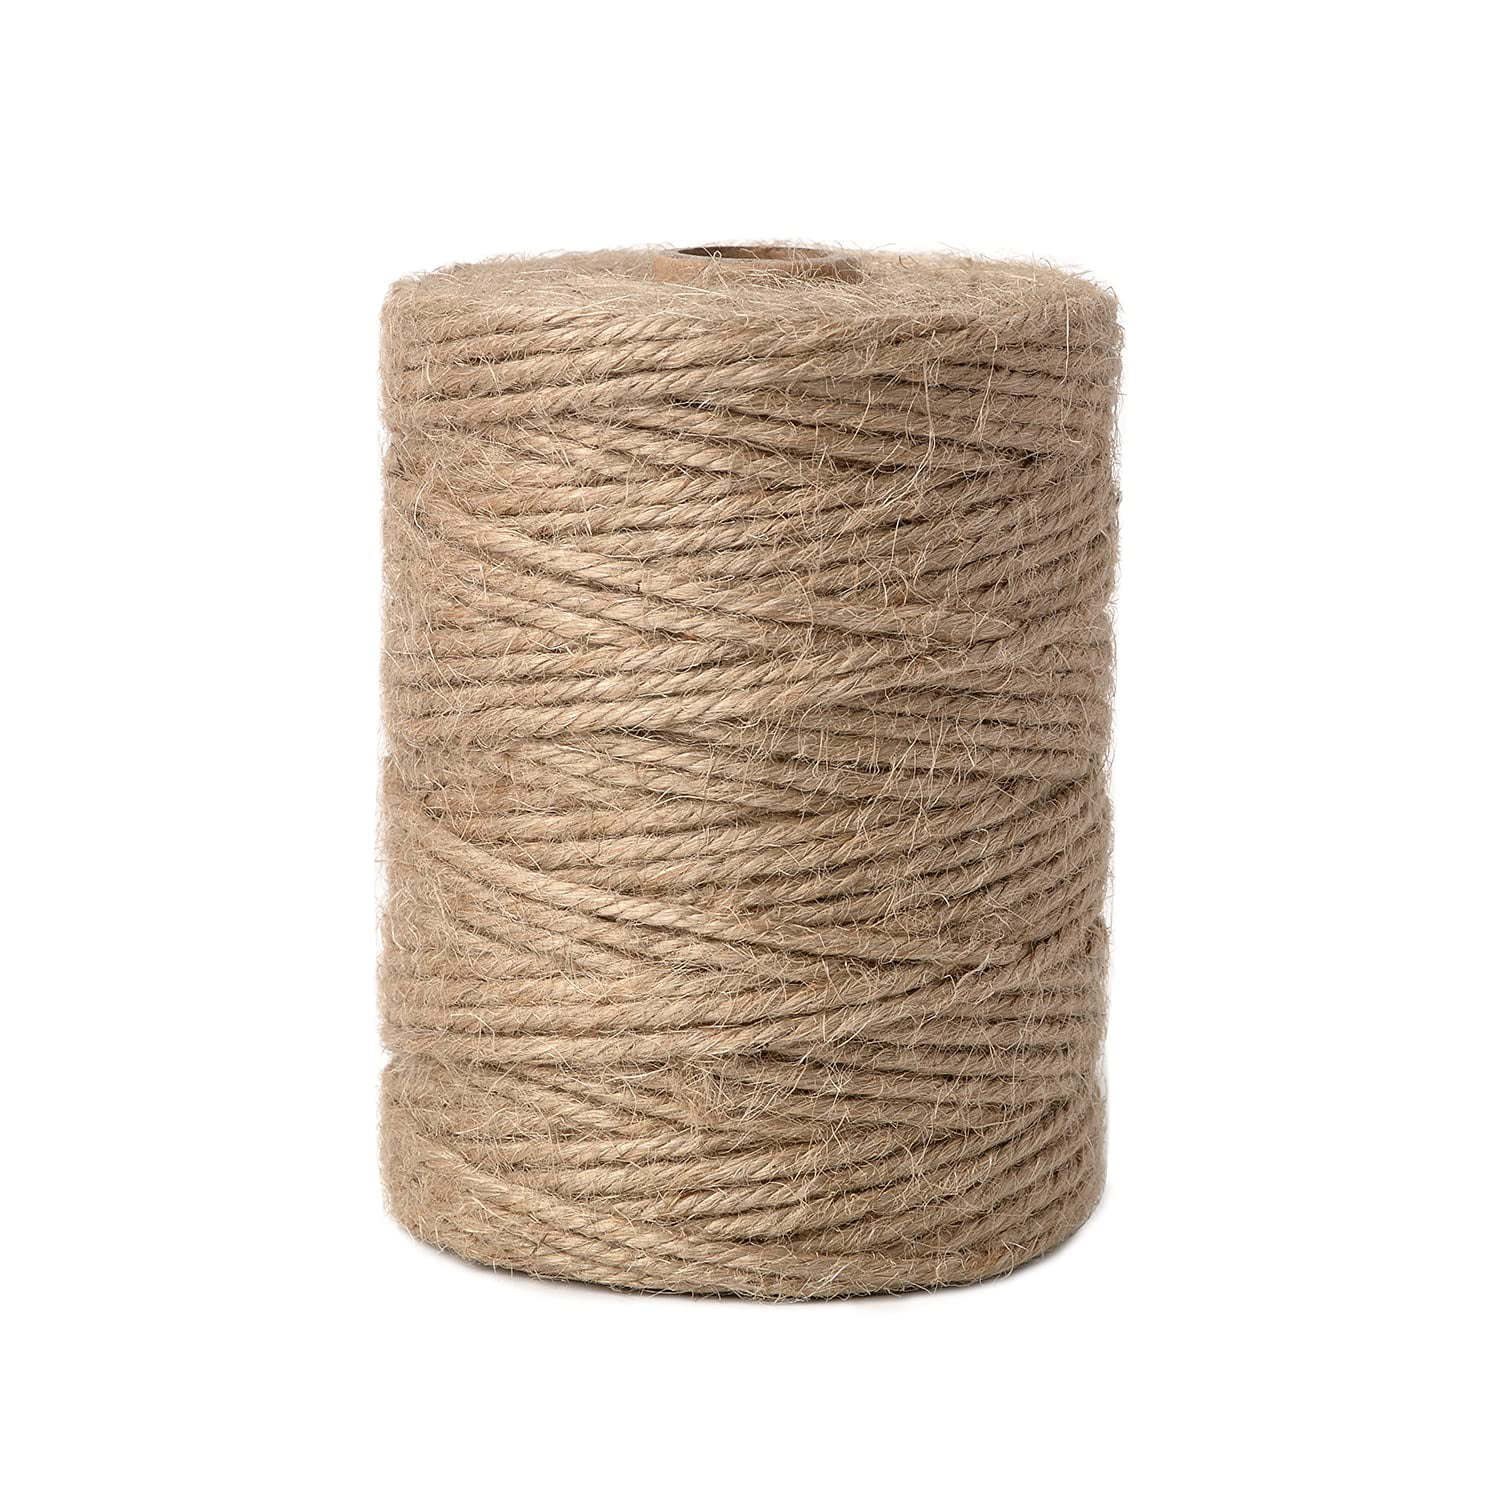 XKDOUS 952ft Butchers Twine, 100% Cotton Food Safe Cooking Twine Kitchen  Twine String, 2mm Natural White Butcher Twine for Meat and Roasting,  Trussing